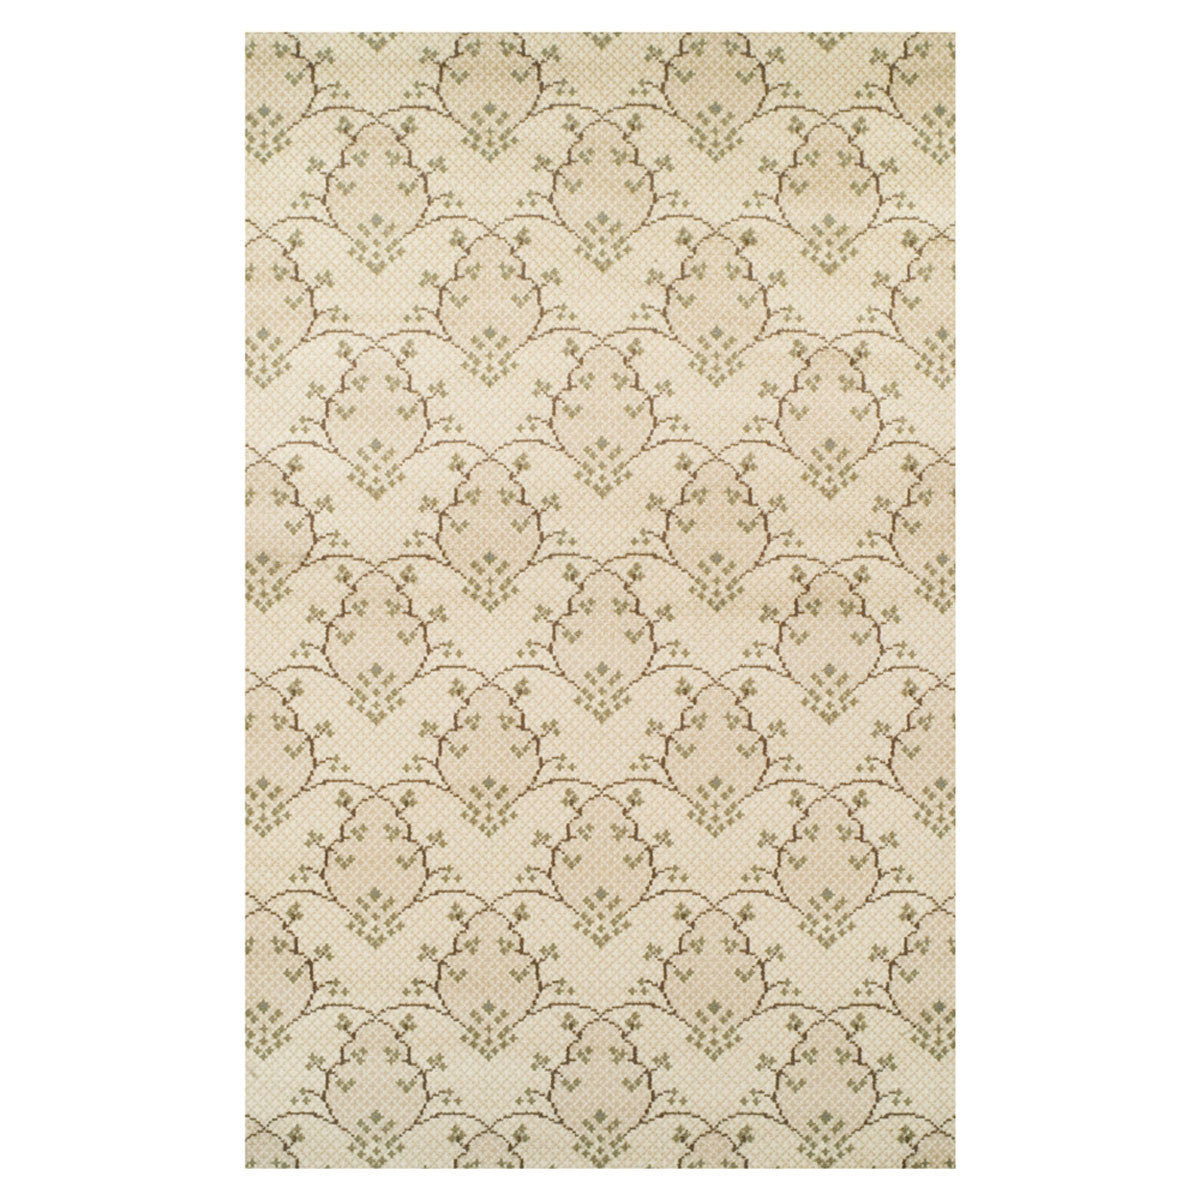 5' X 8' Beige Green and Brown Floral Vines Stain Resistant Area Rug